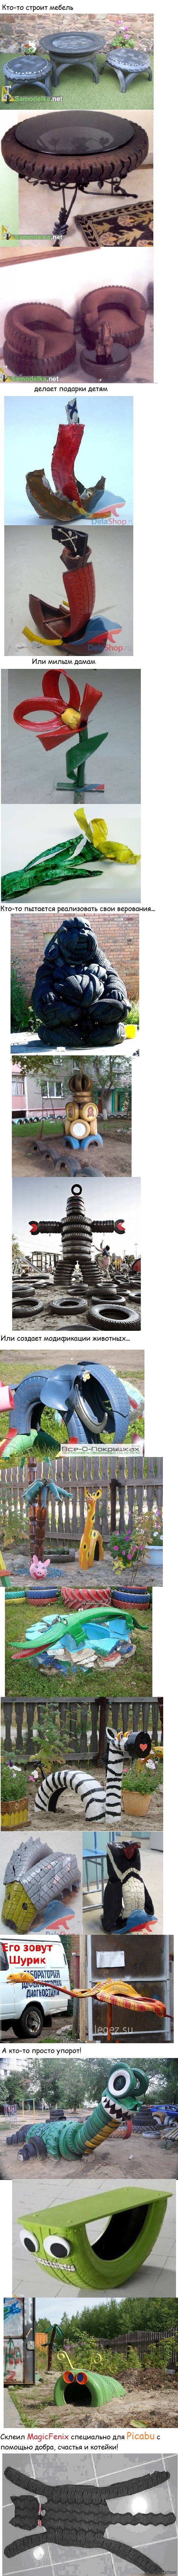 The topic of tires was not fully disclosed! - Other